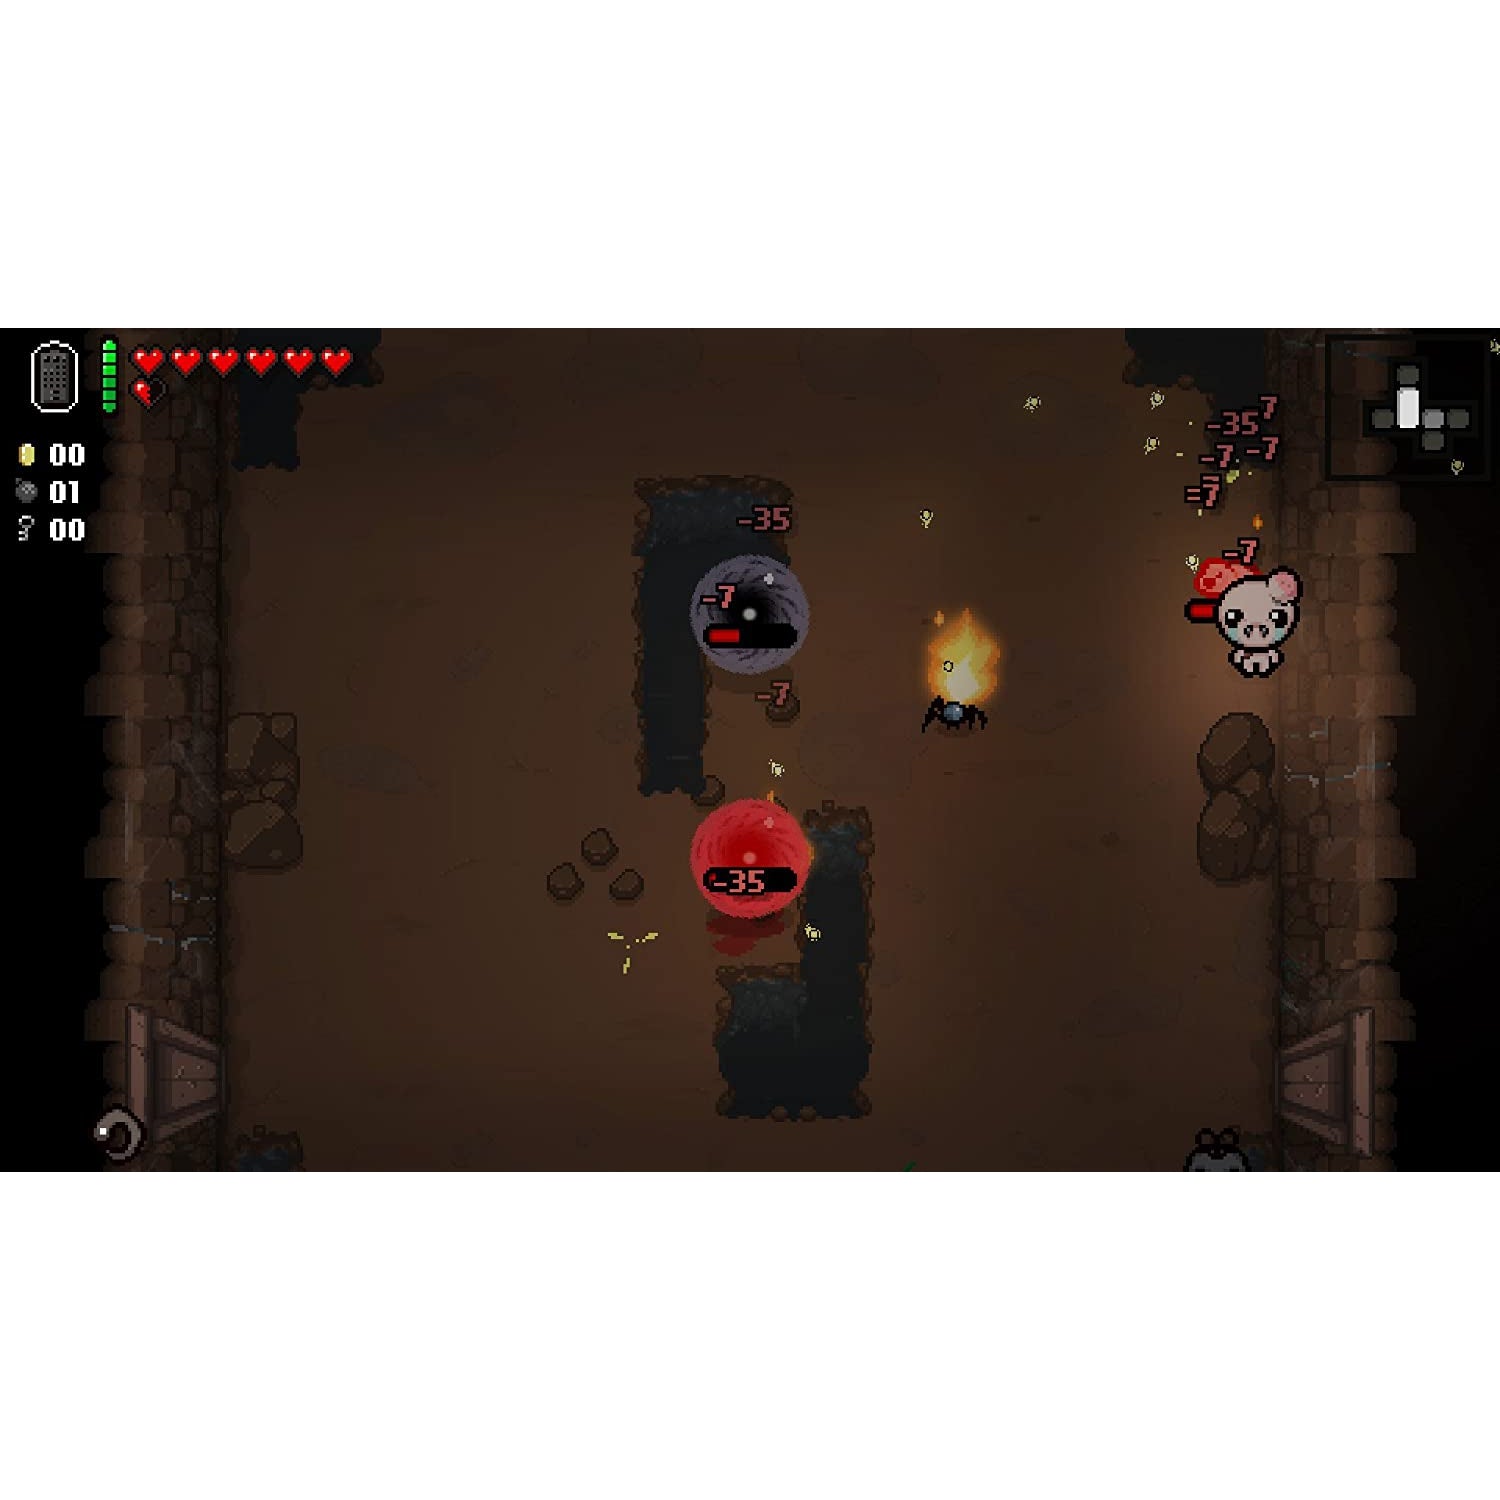 The Binding of Isaac Afterbirth (PS4)